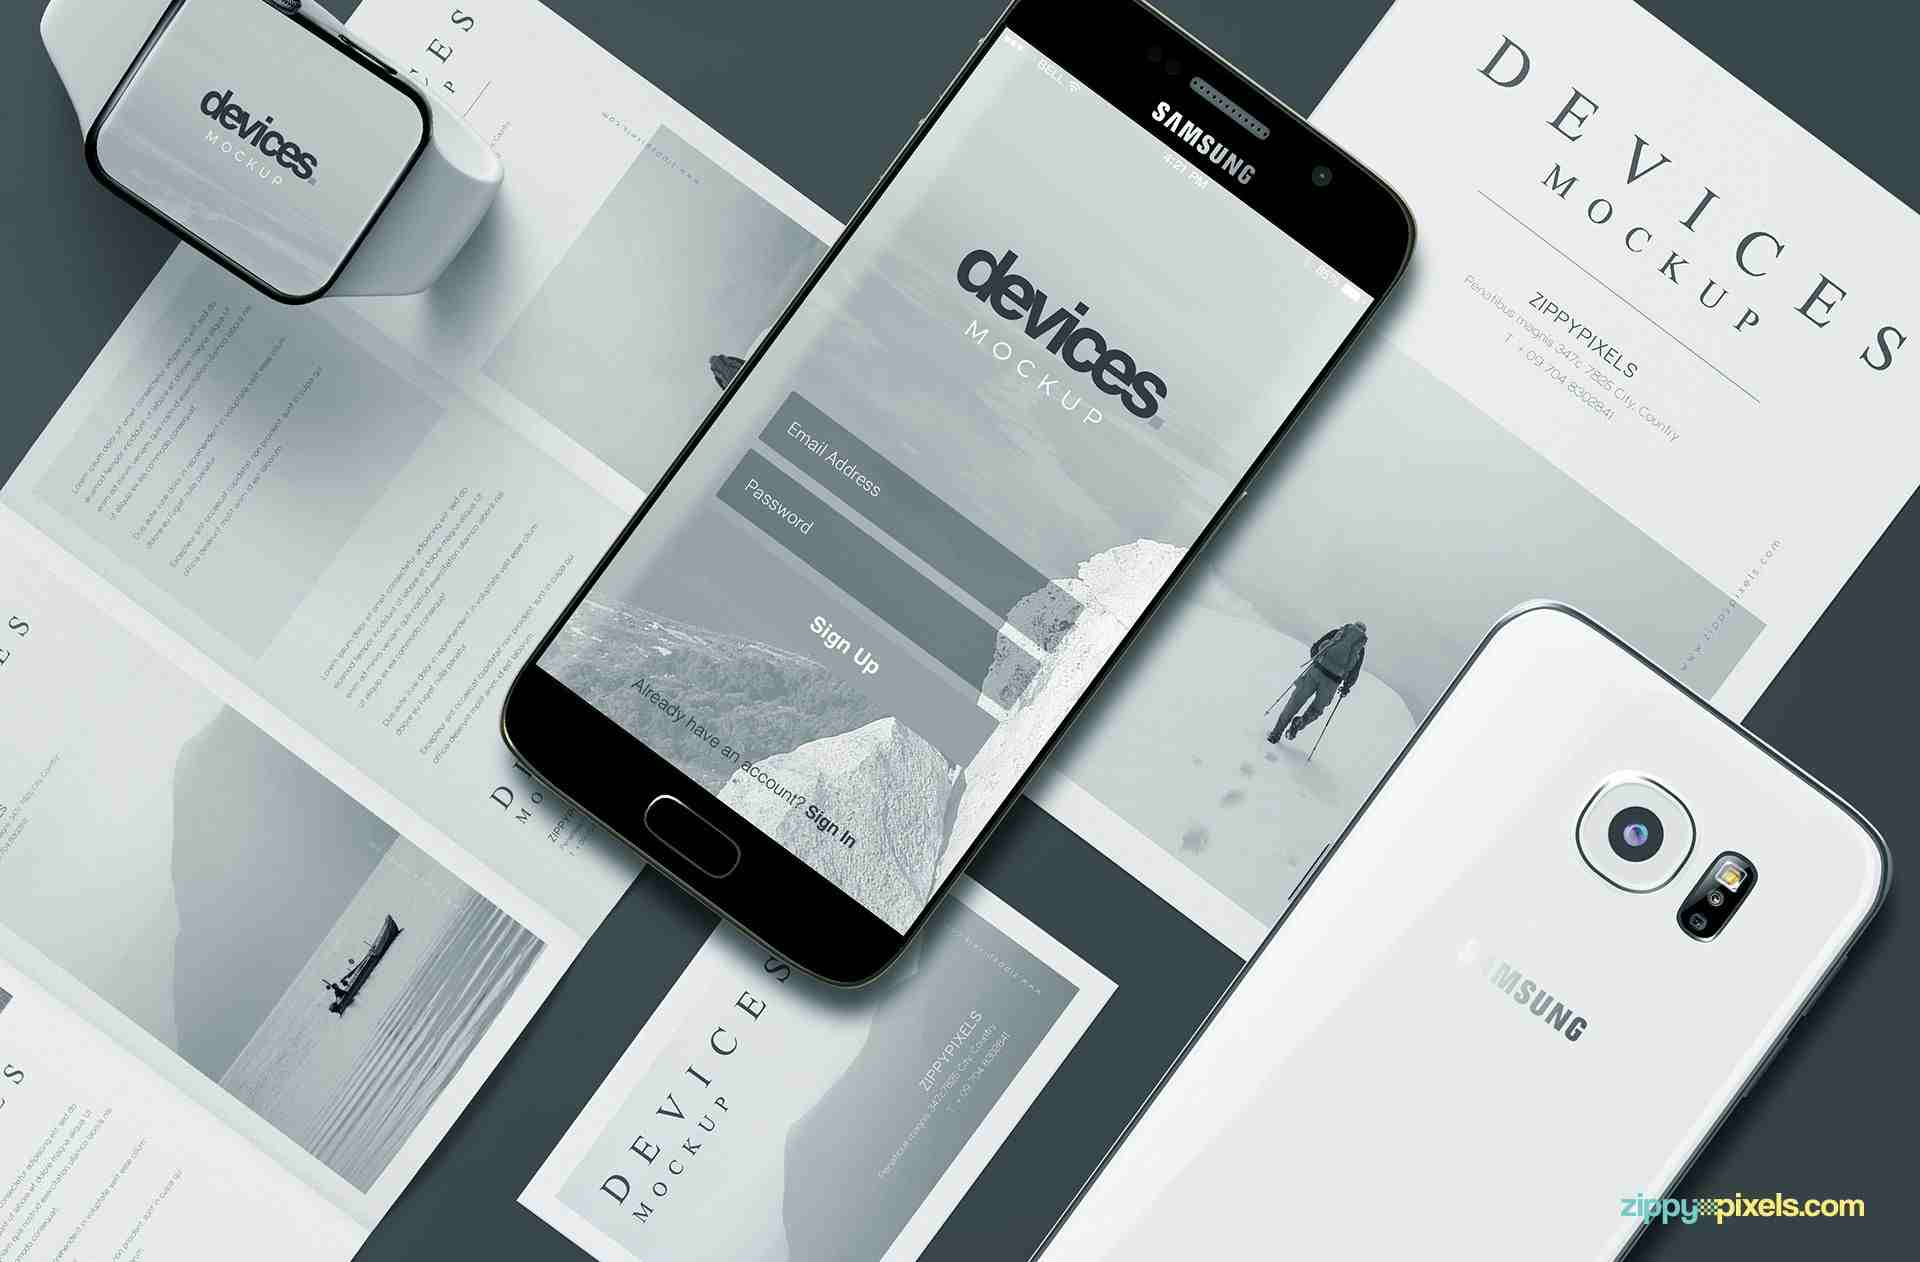 Download 30 Best Free Android Mockup Templates and Mockup Tools in ...